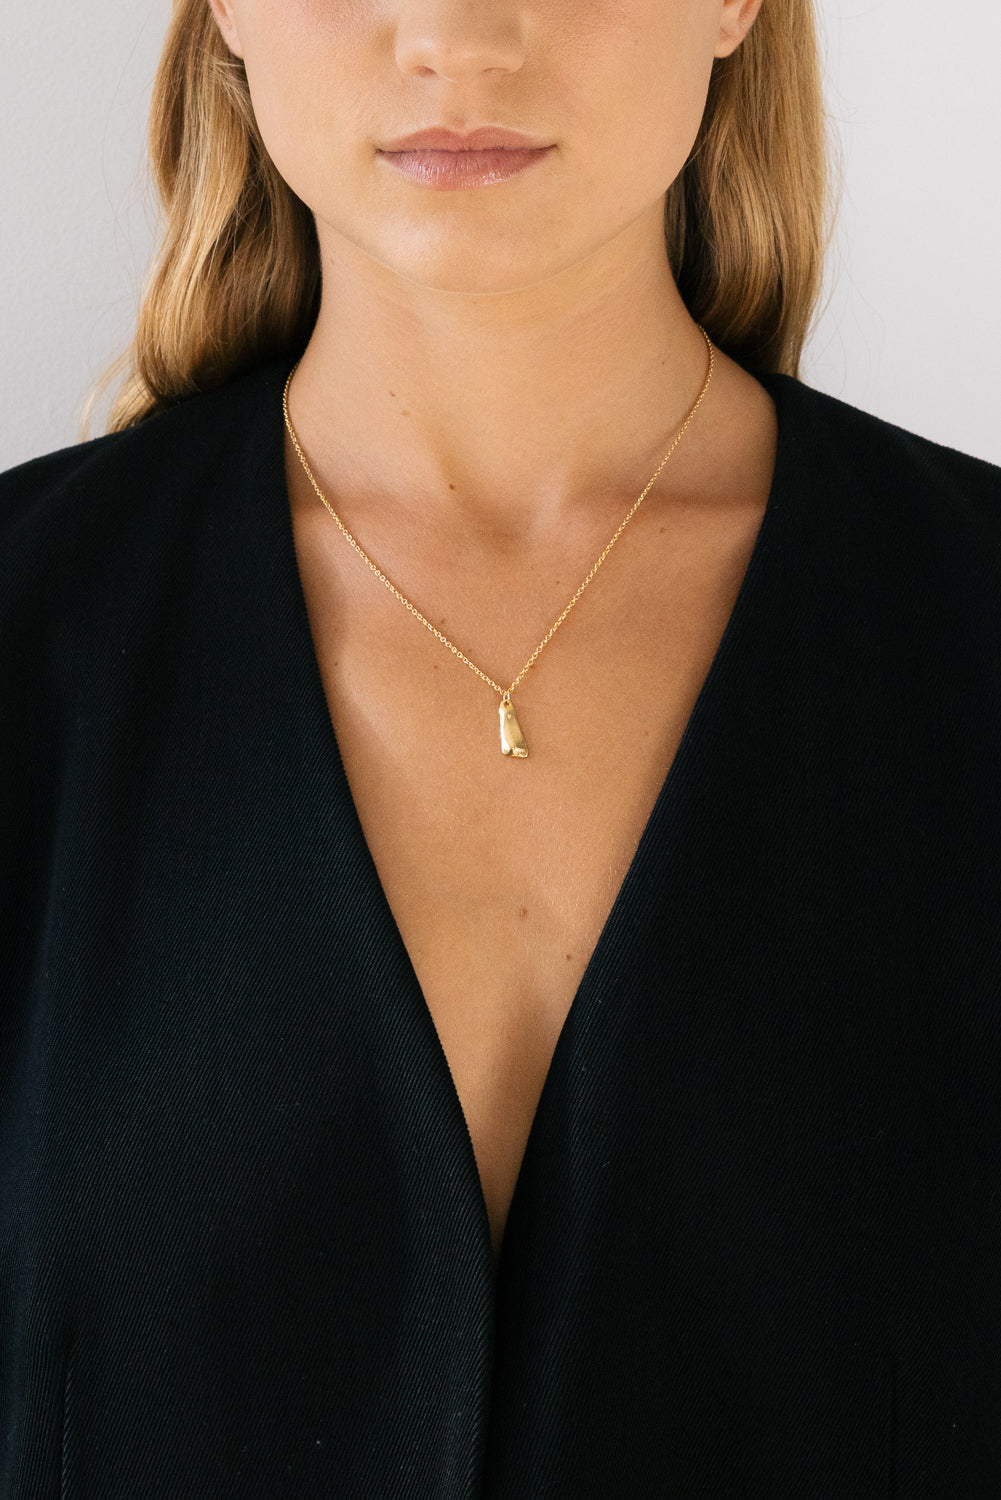 Solo Tag Pendant Necklace - Gold